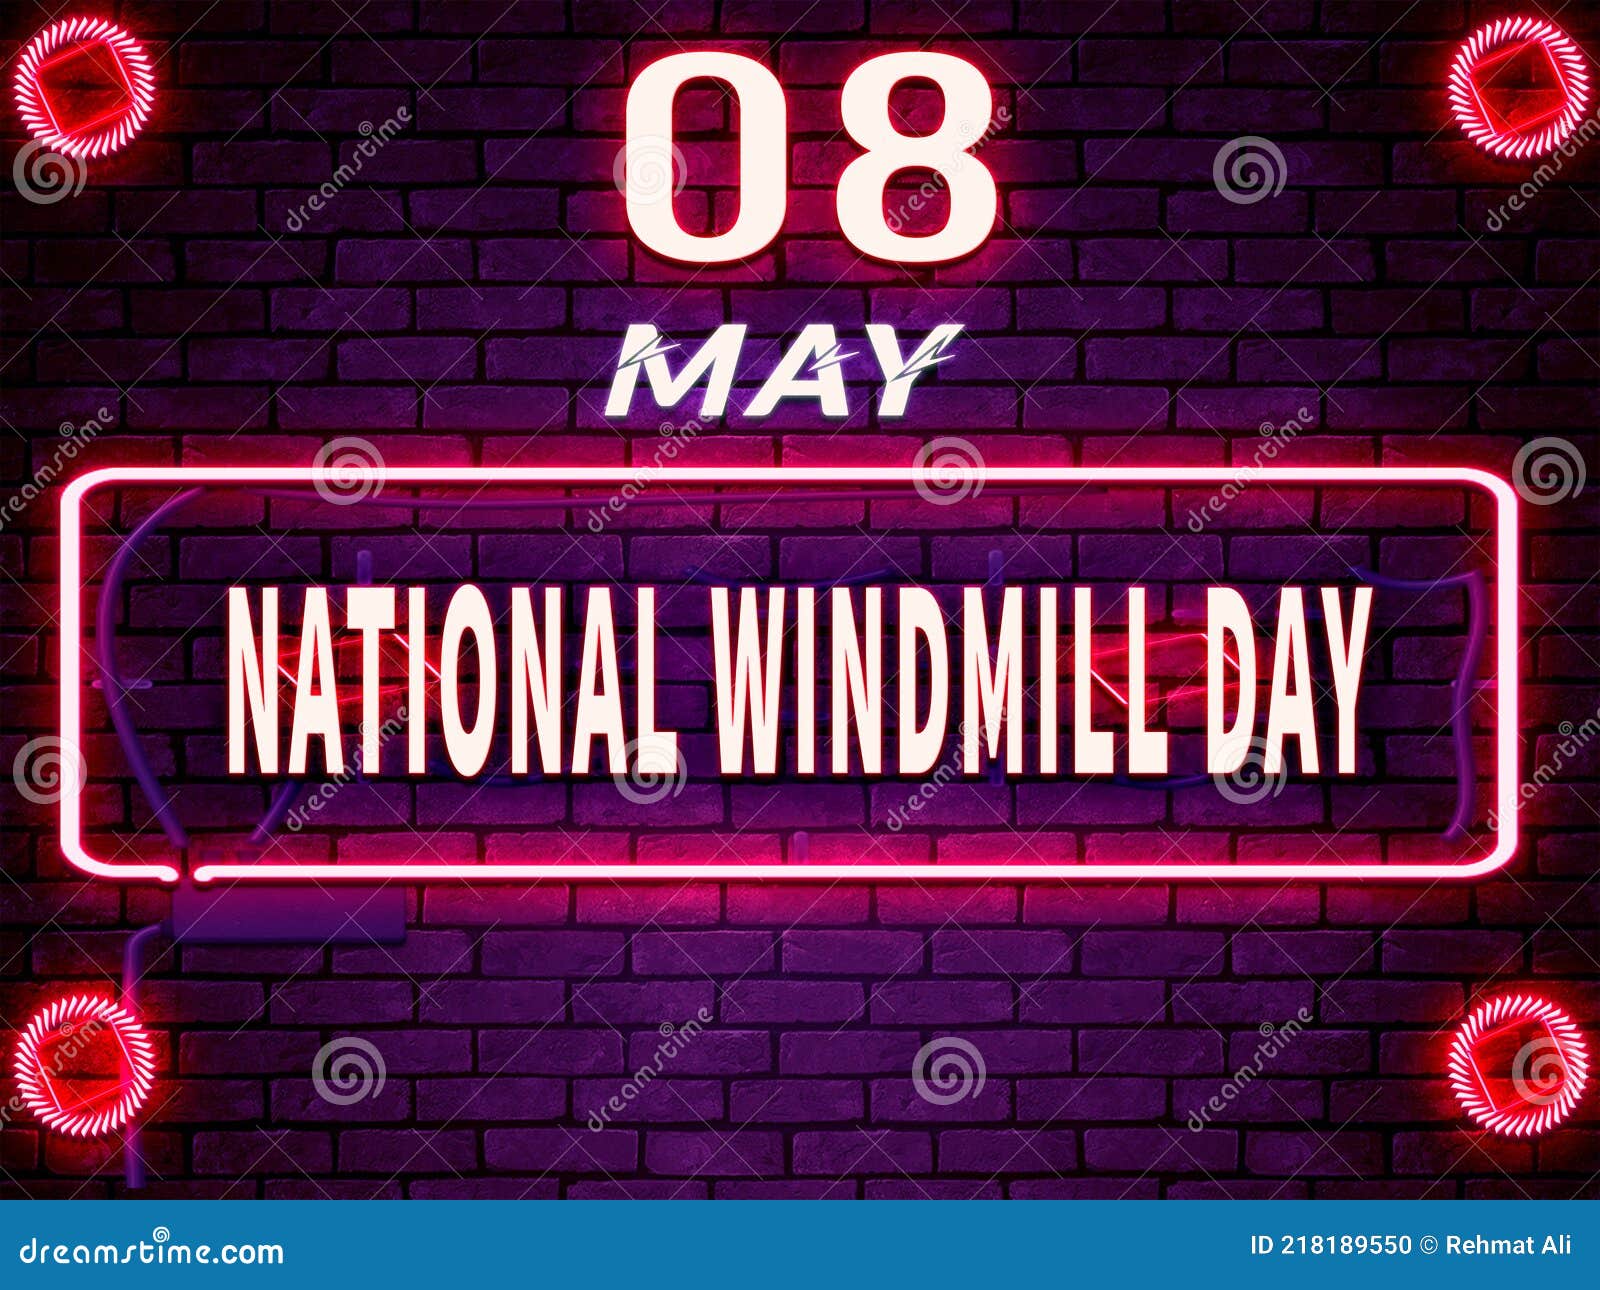 08 May, National Windmill Day. Neon Text Effect on Bricks Background